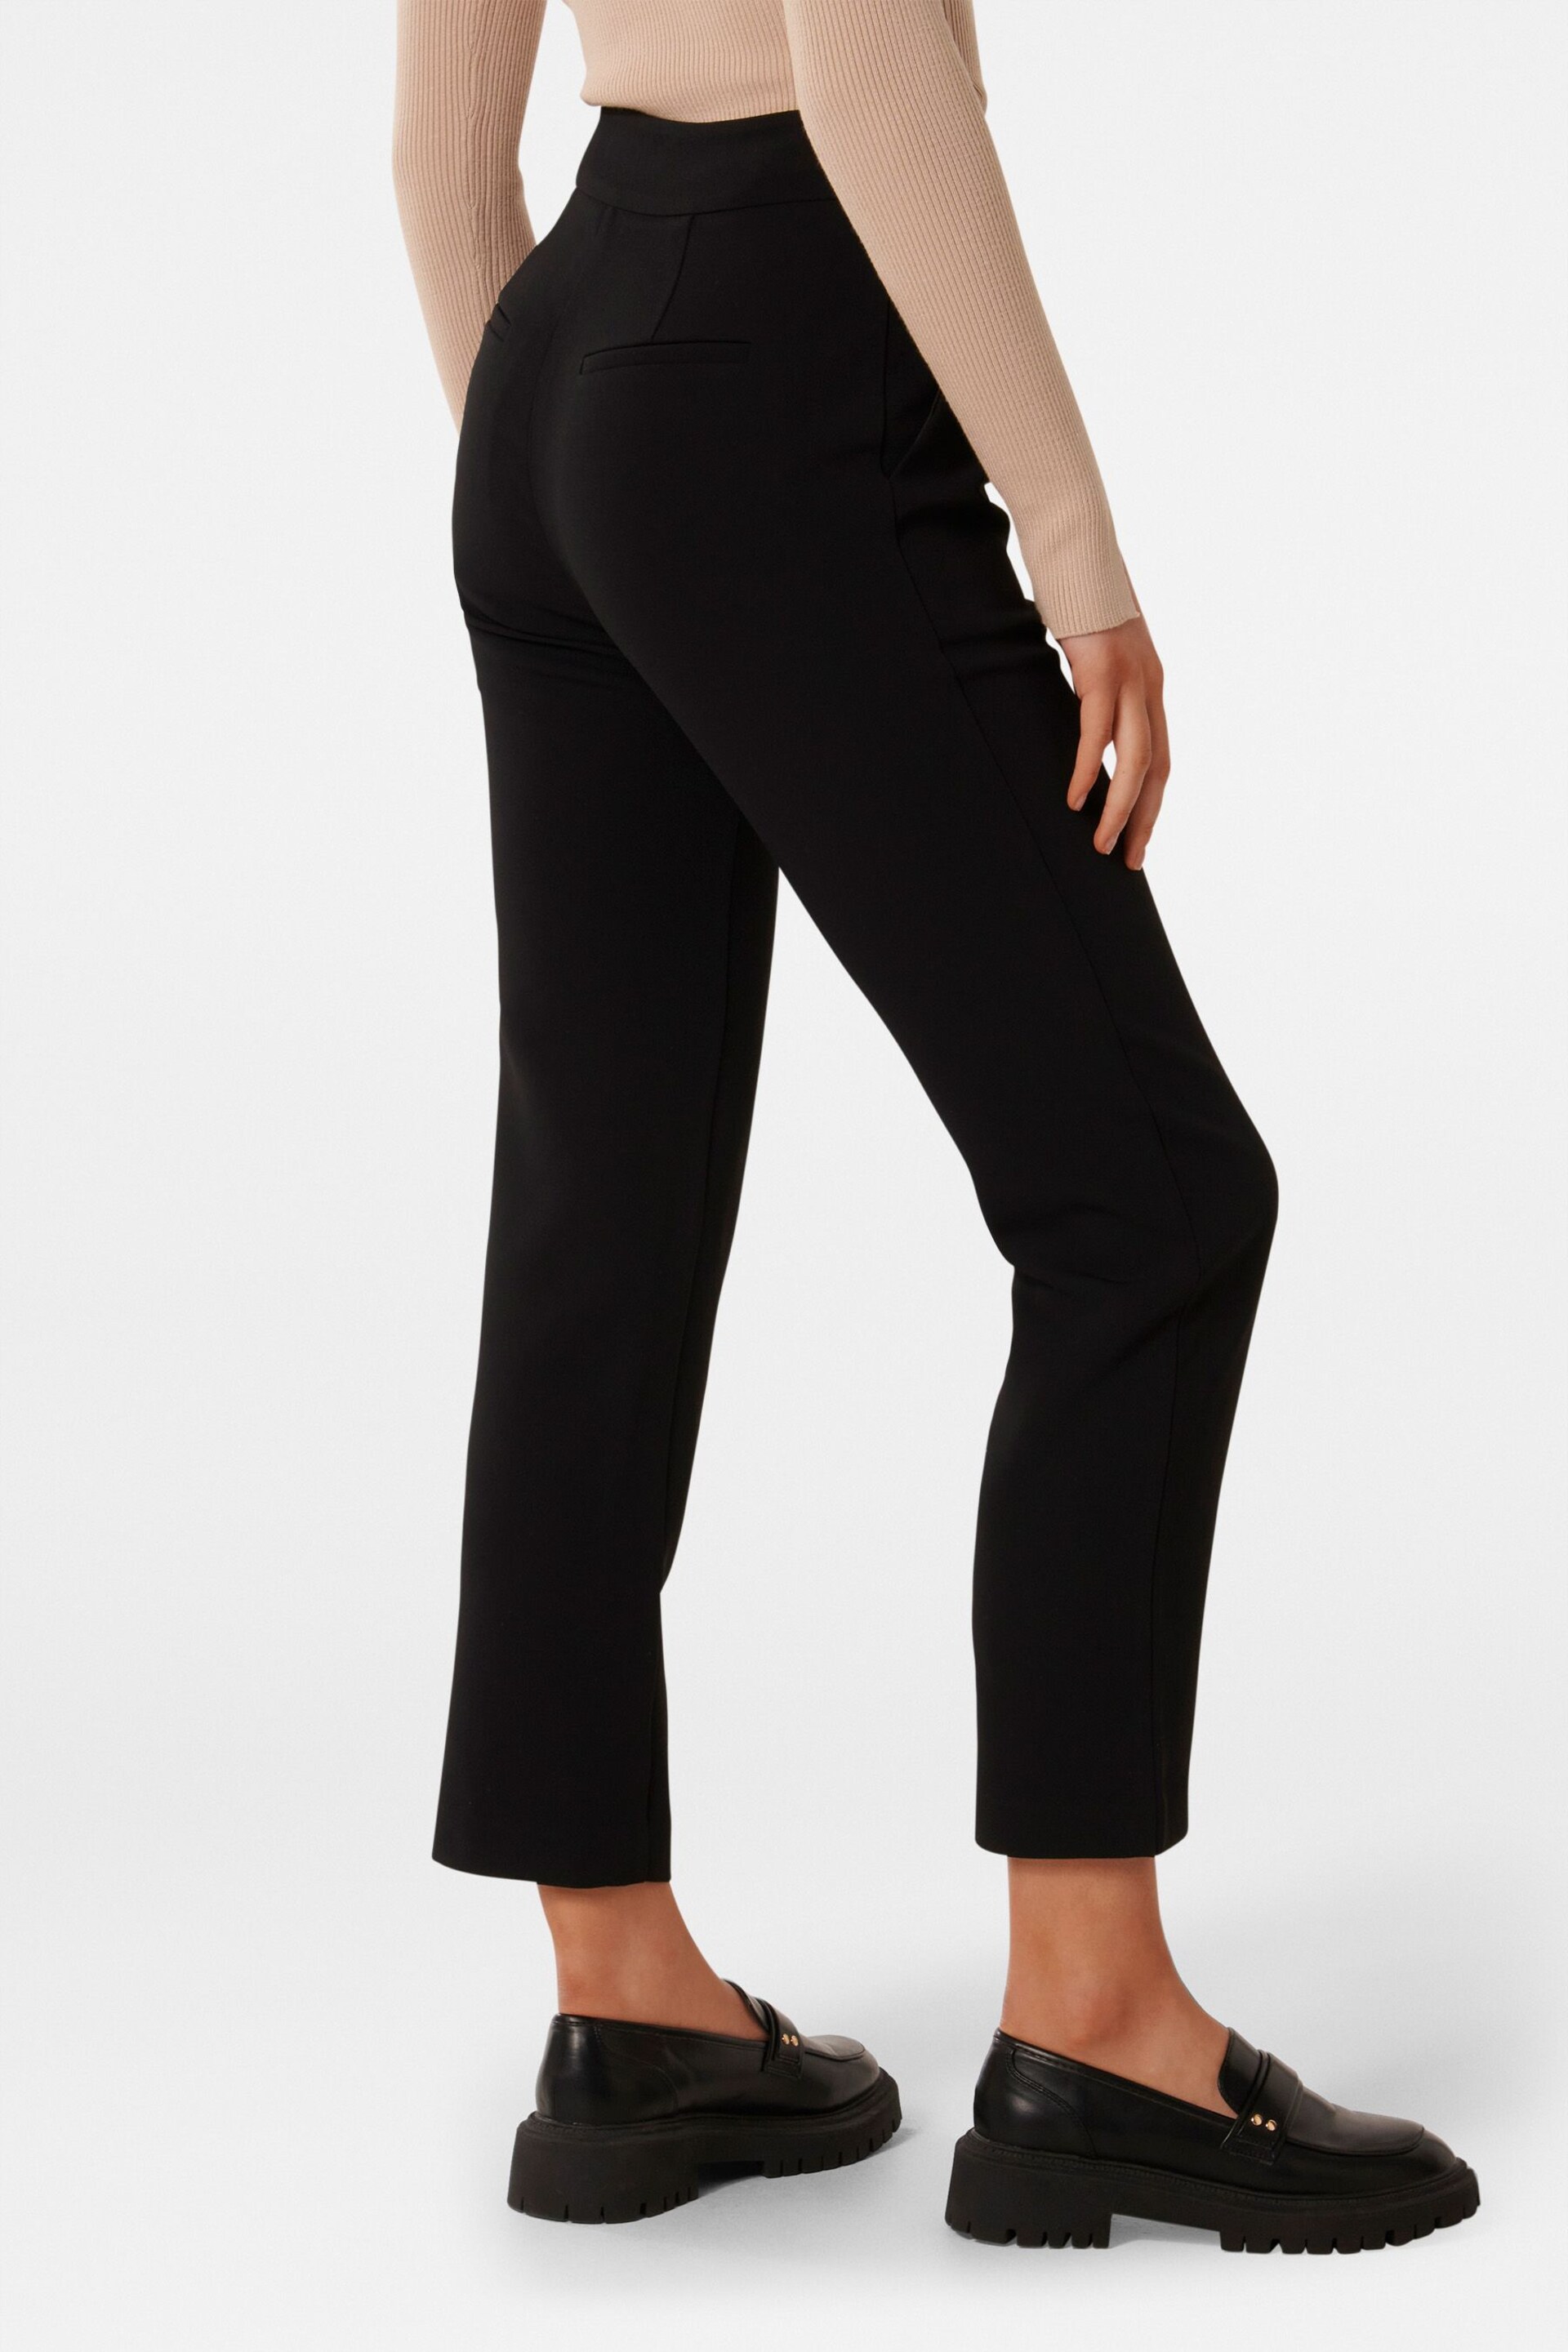 Forever New Black Kylie Button Cigarette Black Trousers - Image 3 of 5